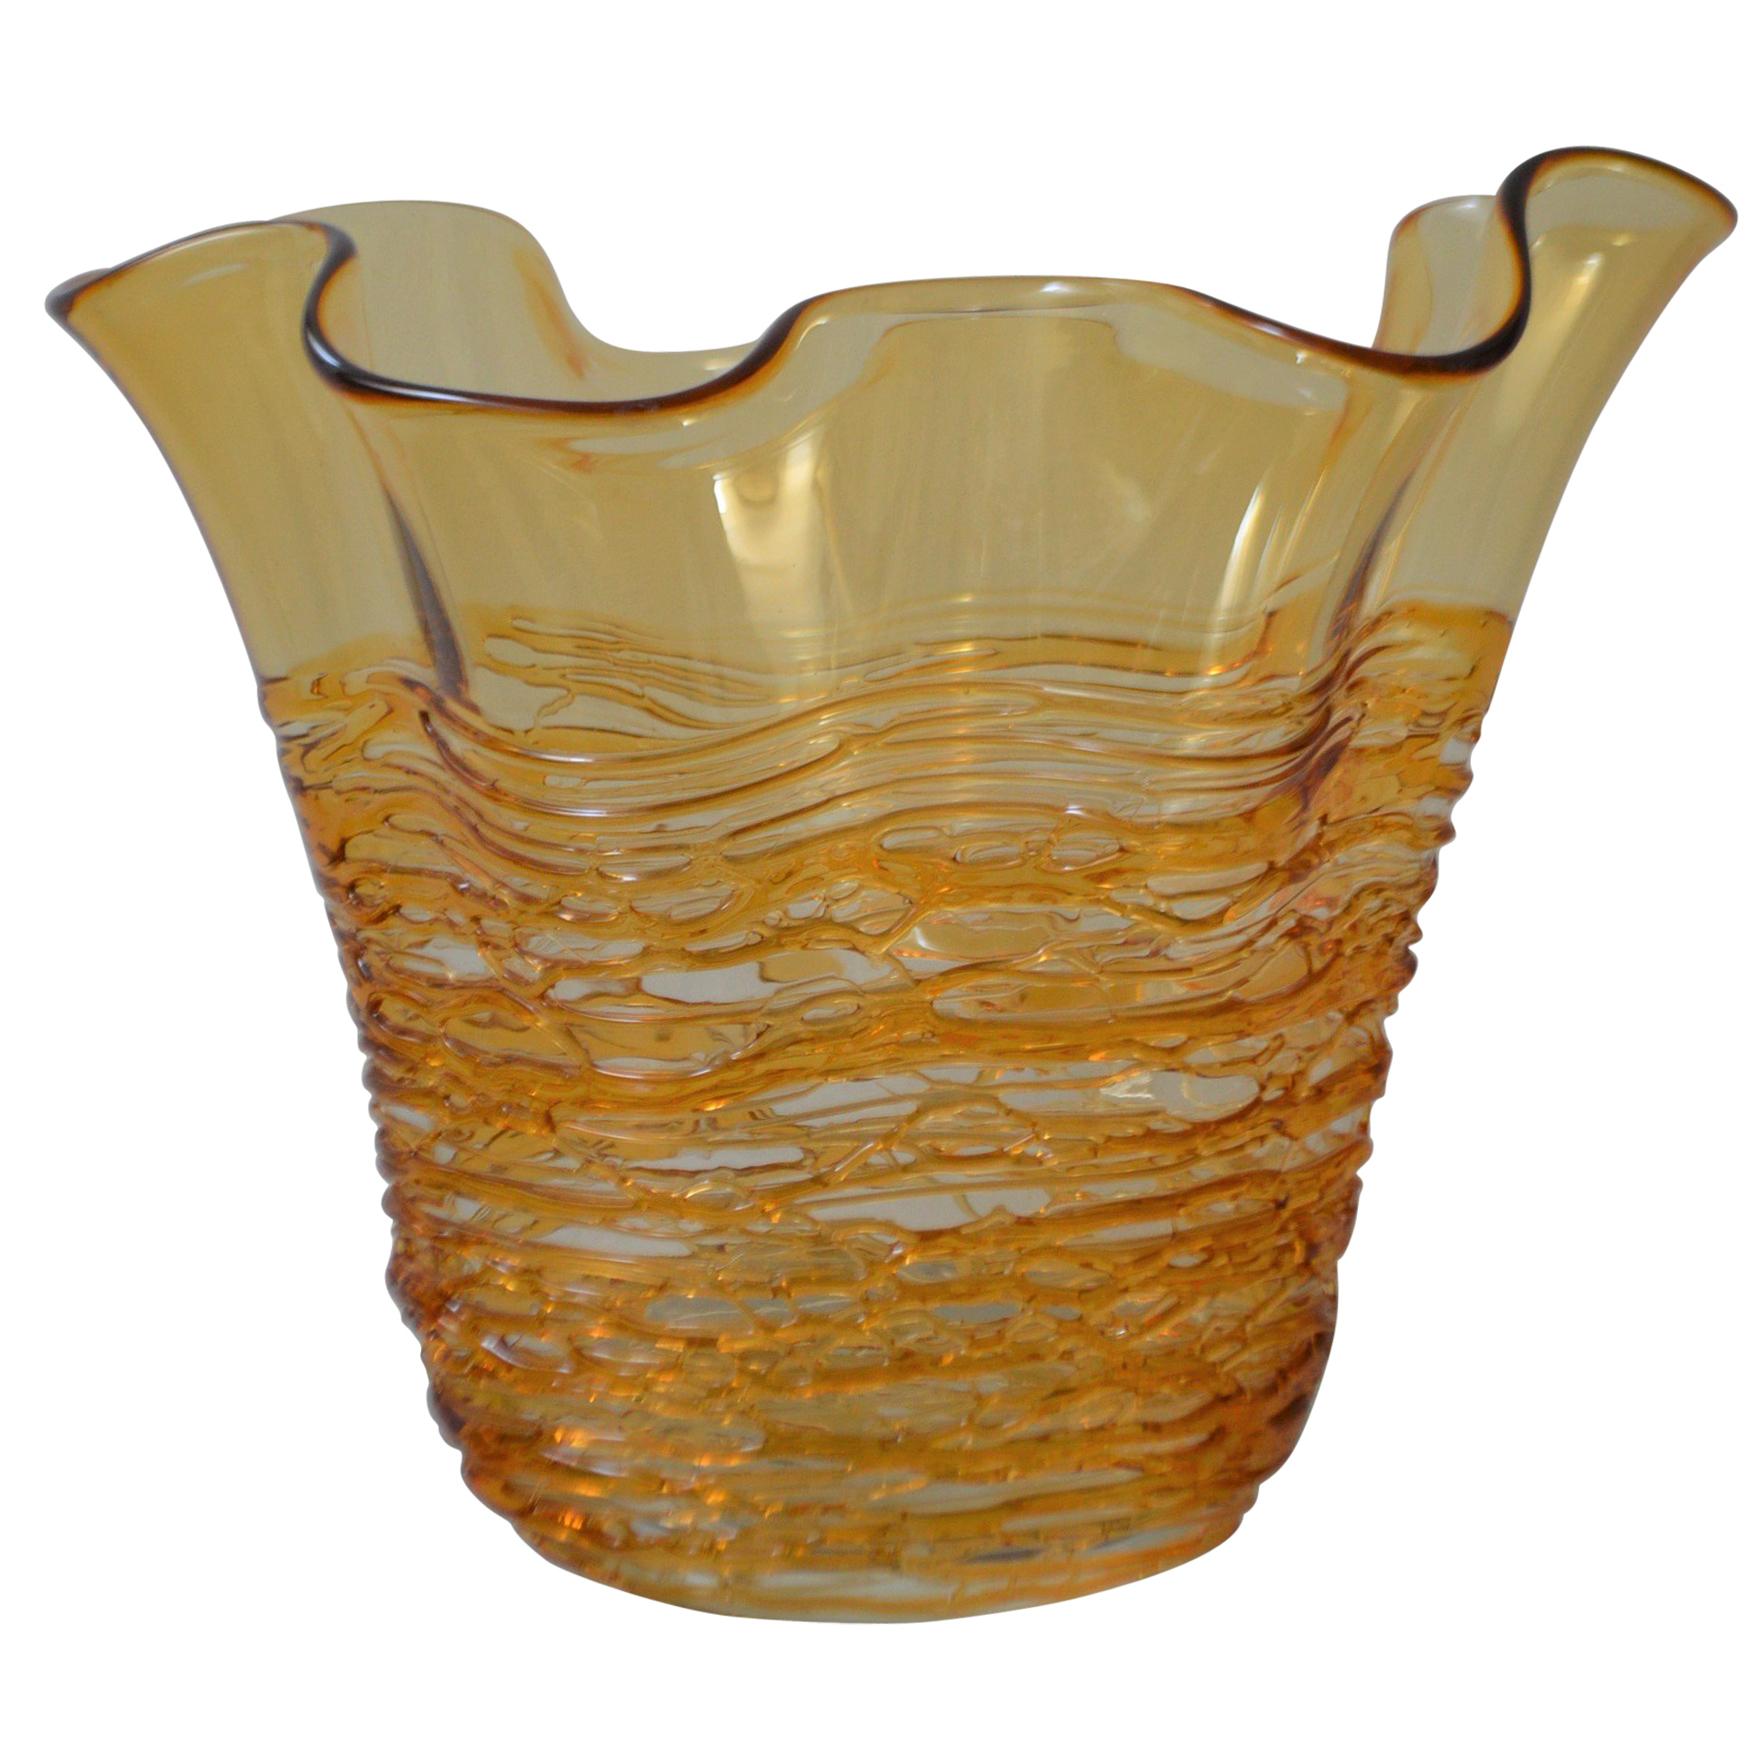 Hand Blown Decorative Murano Gold Glass Vase with a Lace Design